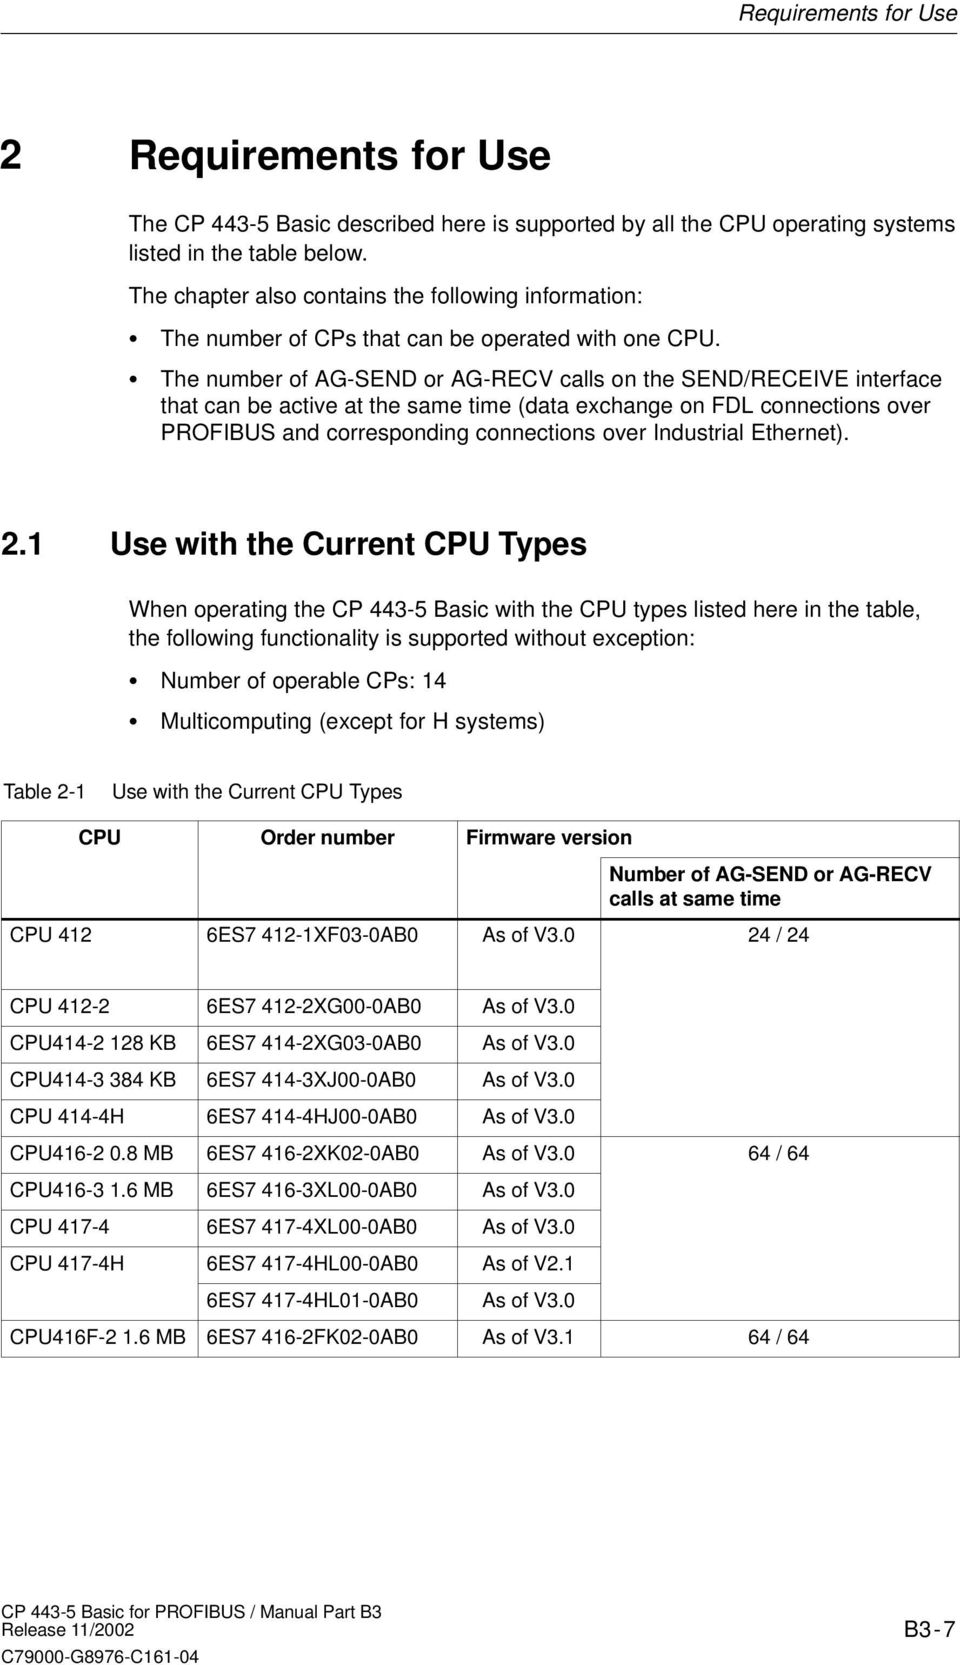 The number of AG-SEND or AG-RECV calls on the SEND/RECEIVE interface that can be active at the same time (data exchange on FDL connections over PROFIBUS and corresponding connections over Industrial